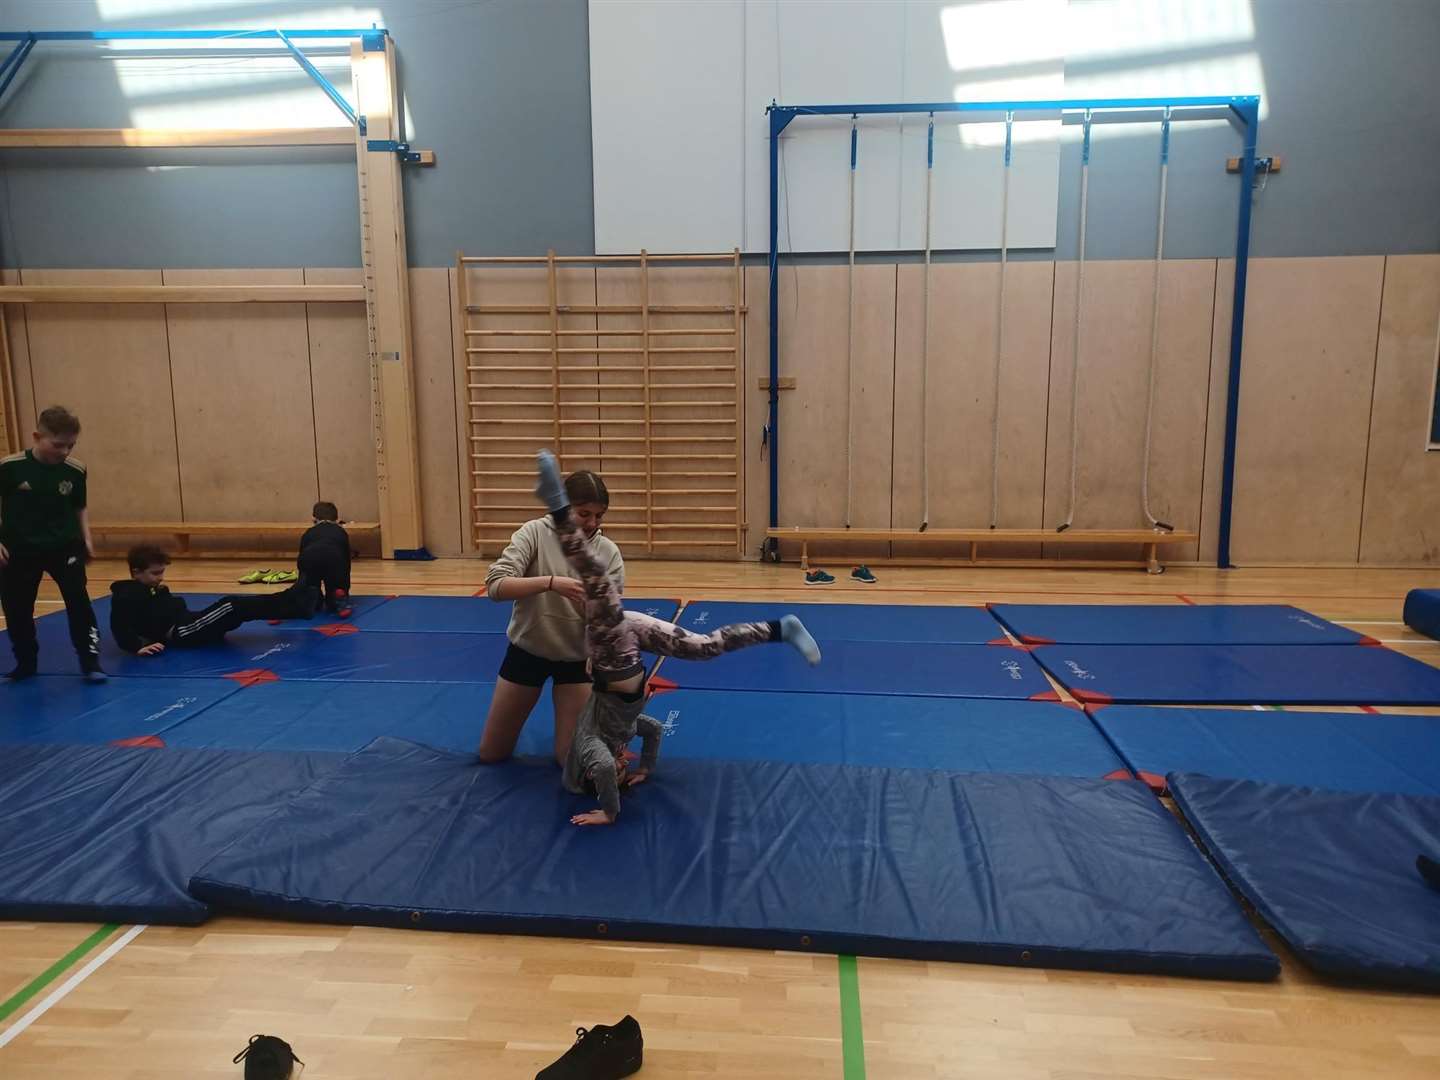 Learning good techniques at gymnastics.